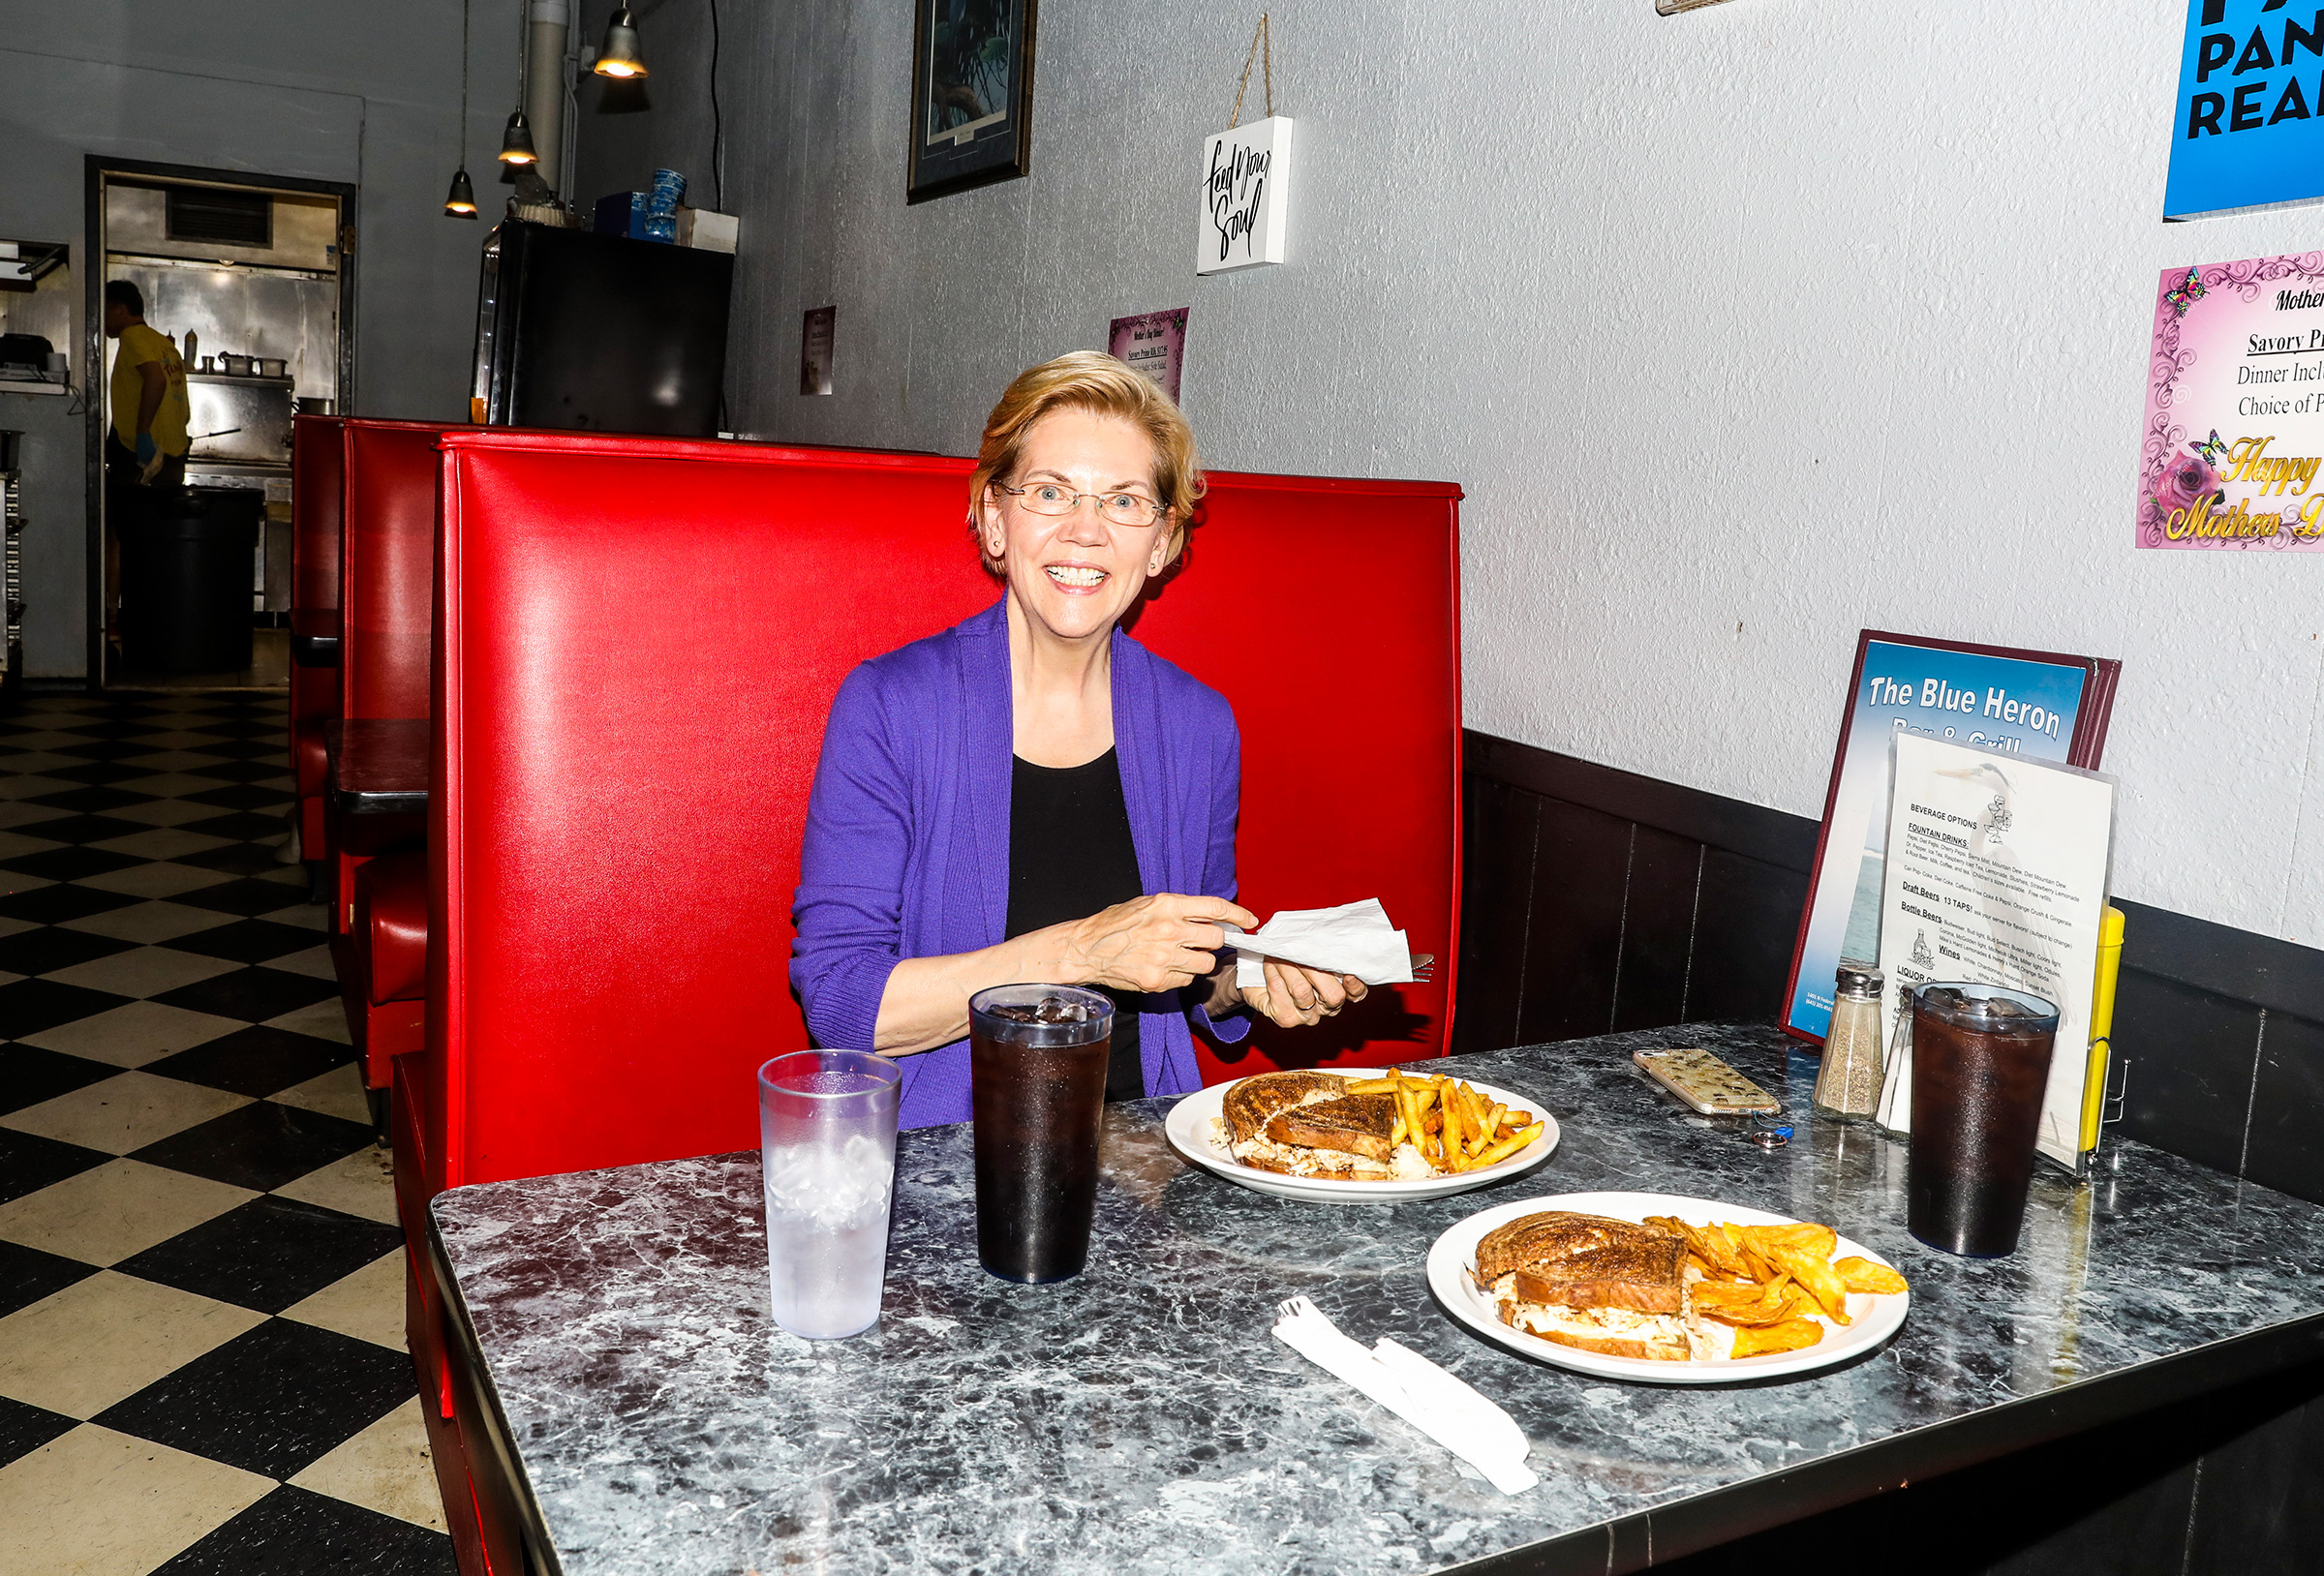 On May 4, Democratic presidential candidate Sen. Elizabeth Warren stops for lunch at The Blue Heron in Mason City, Iowa. May 20 issue. (Krista Schlueter for TIME)